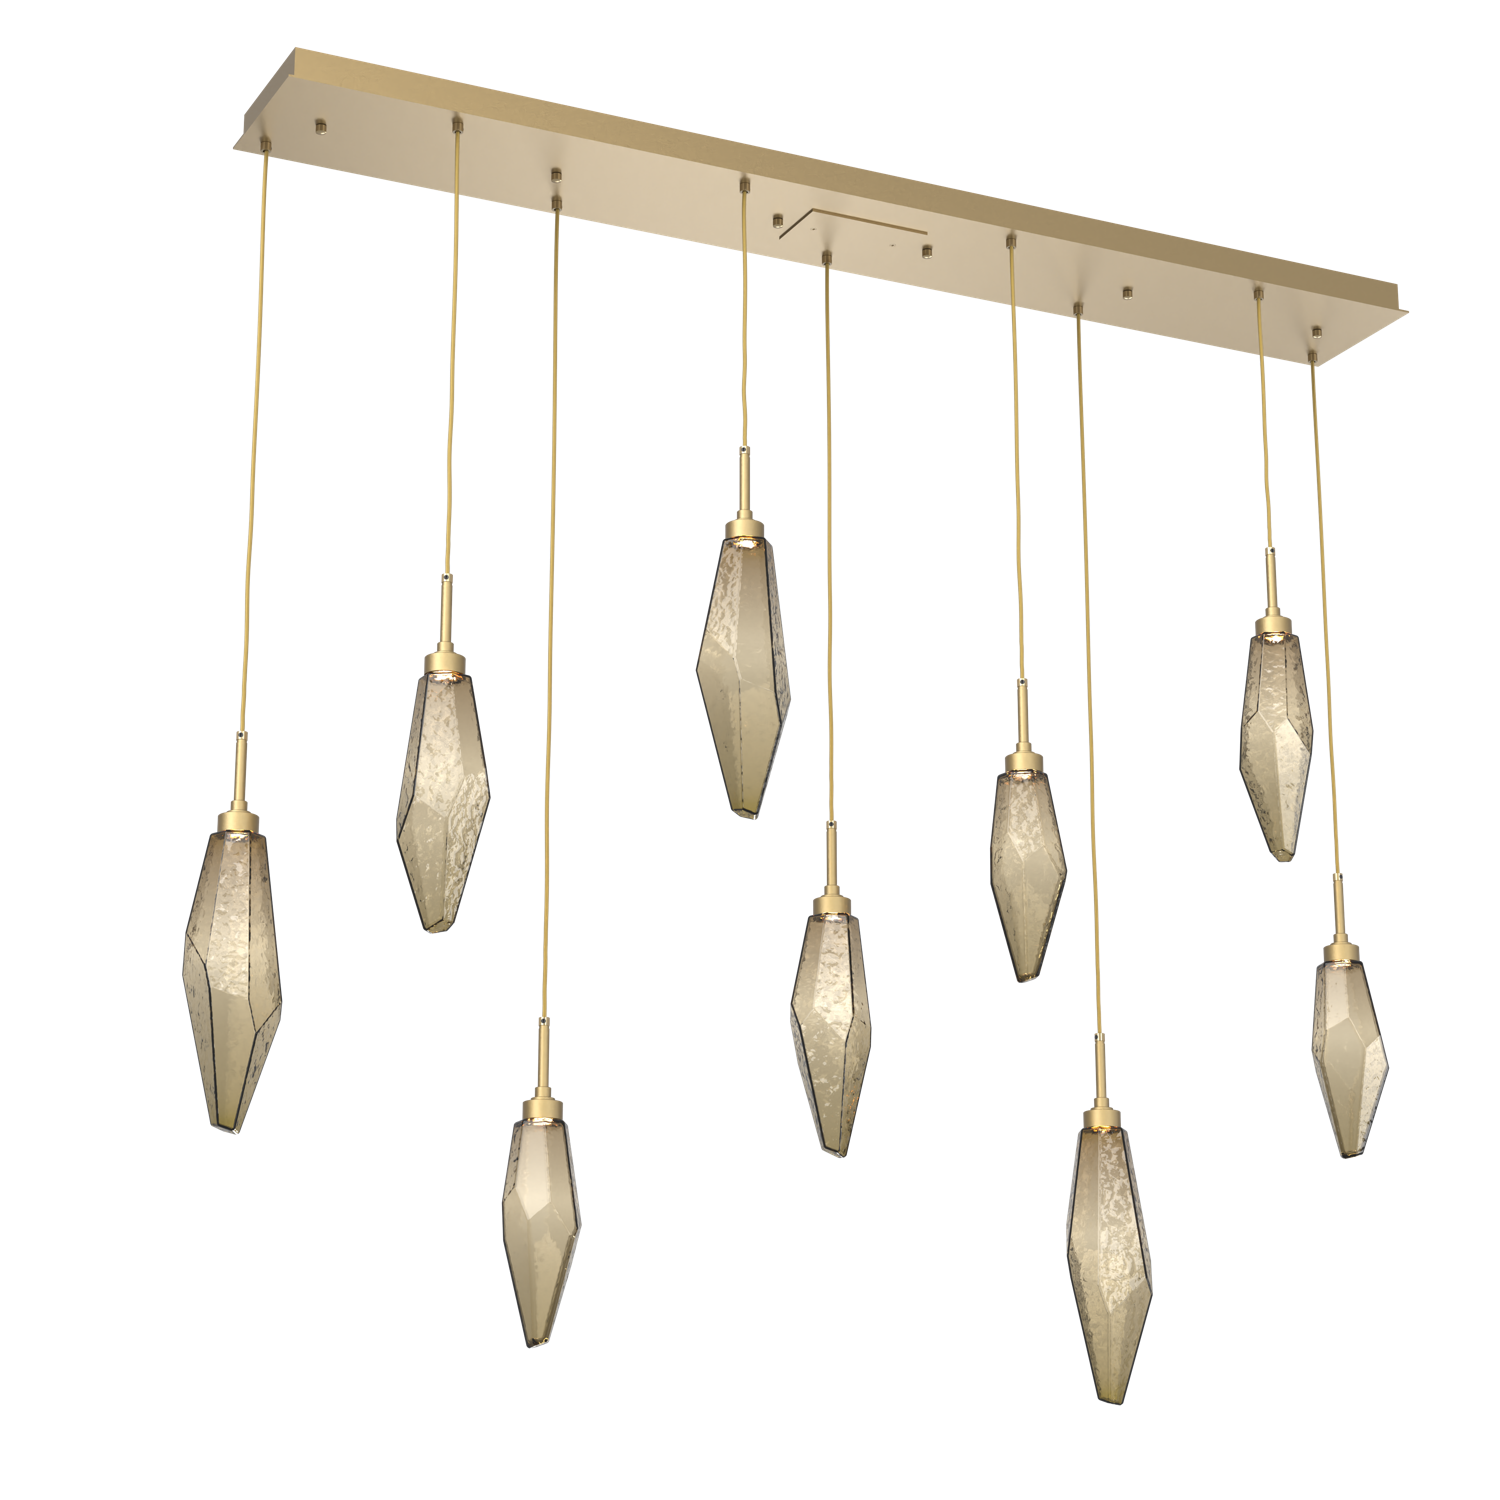 PLB0050-09-GB-CB-Hammerton-Studio-Rock-Crystal-9-light-linear-pendant-chandelier-with-gilded-brass-finish-and-chilled-bronze-blown-glass-shades-and-LED-lamping